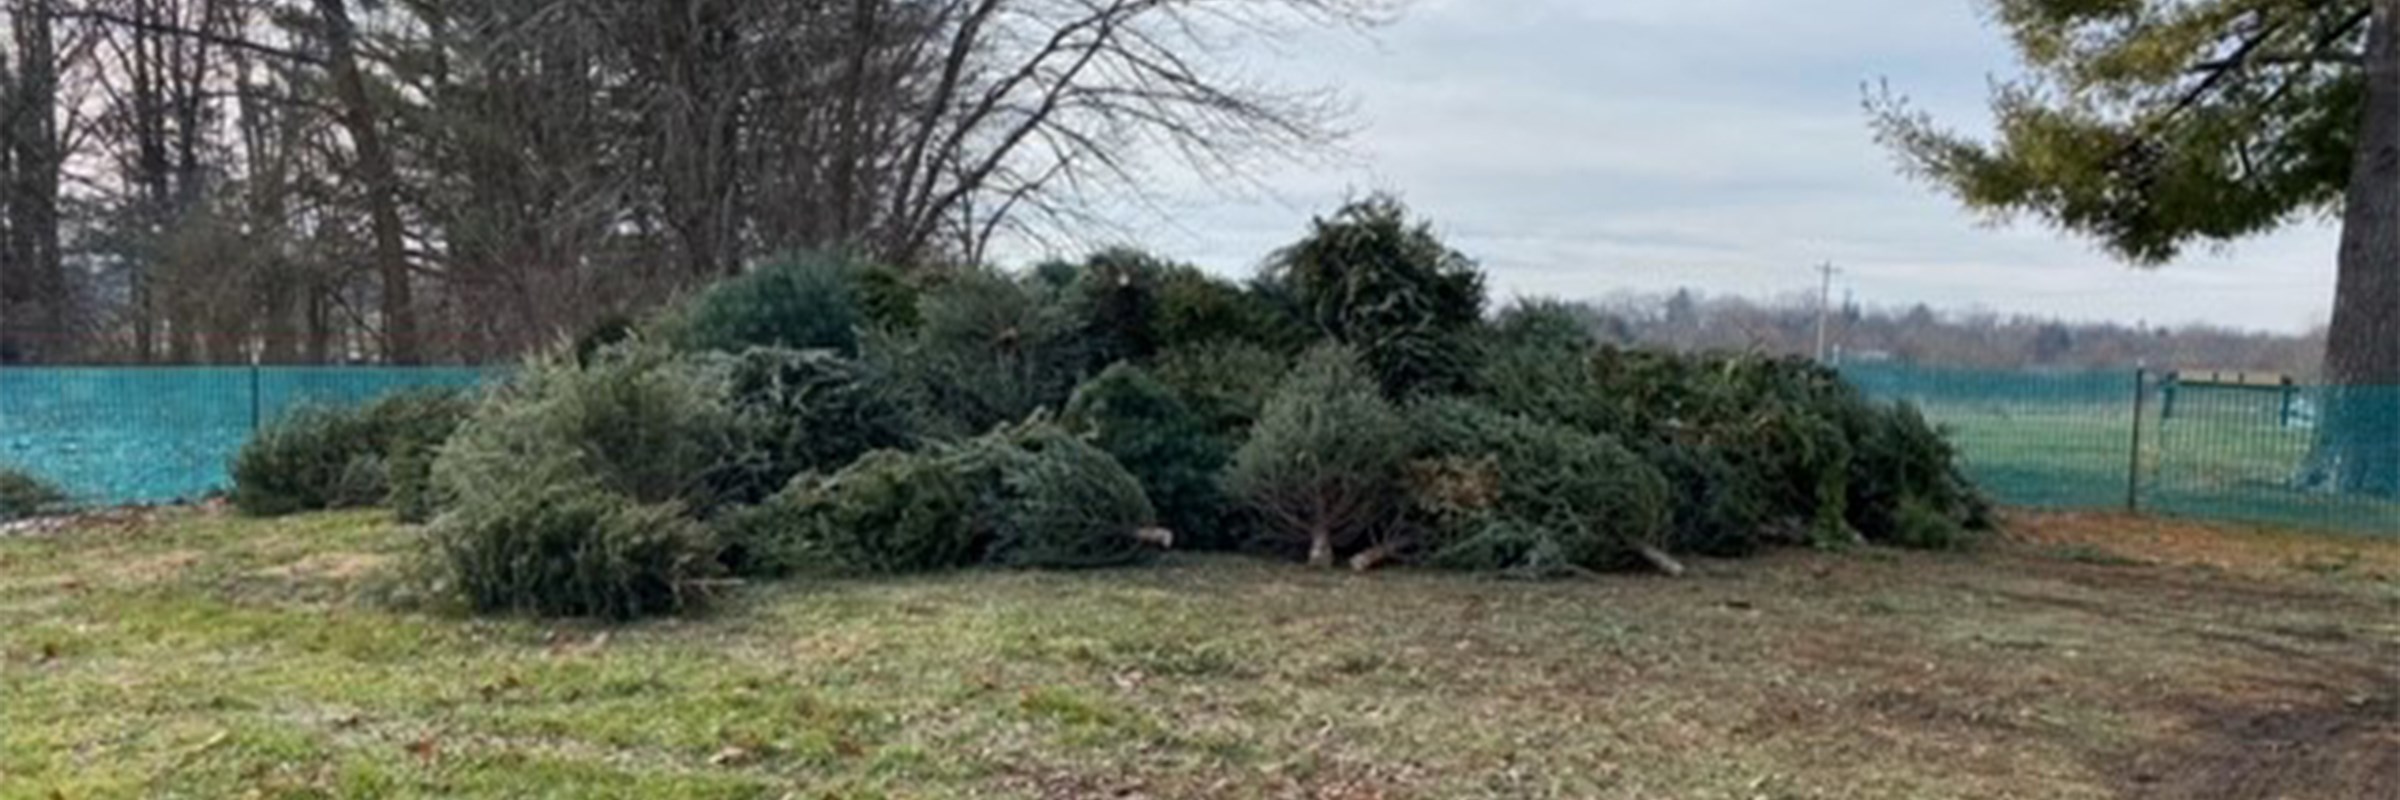 Snowflakes, lights, and Christmas tree recycling with Champaign County Forest Preserve District